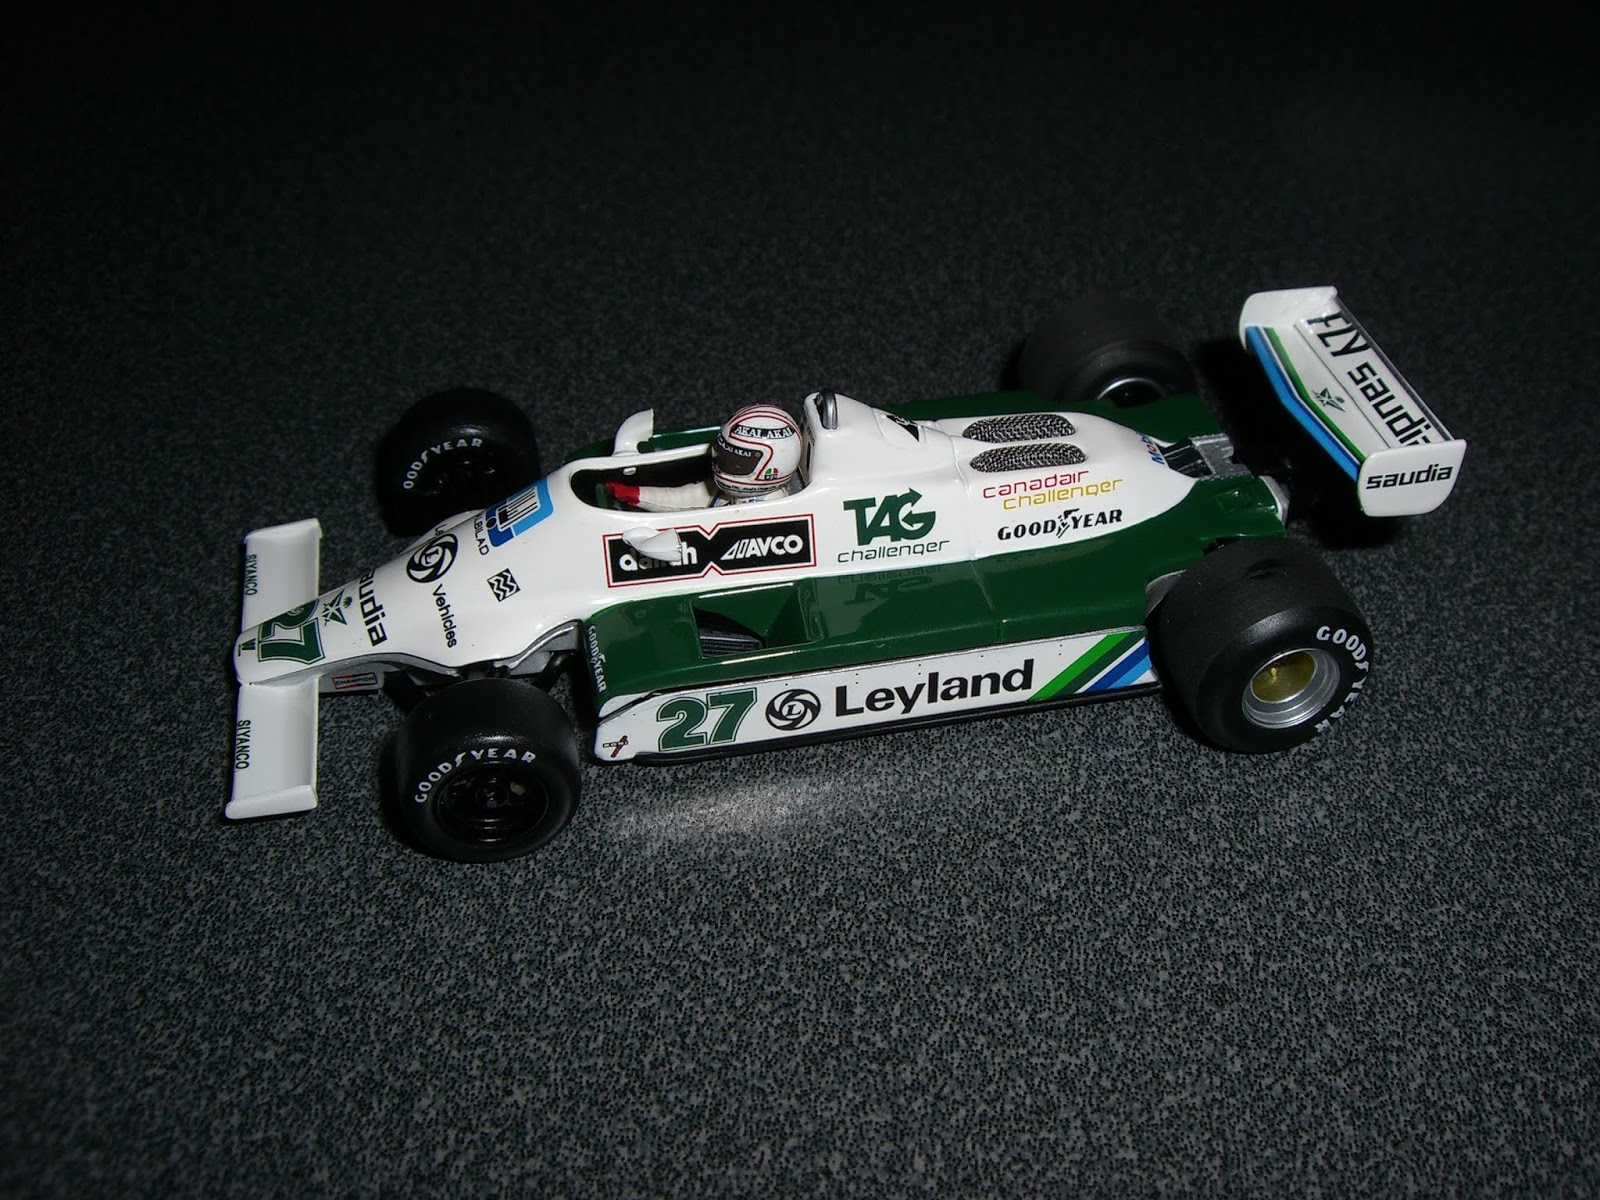 ZF1377 Heller 1/43 maquette voiture 80100 Mc Laren Tag Racing Prost Silverstone 